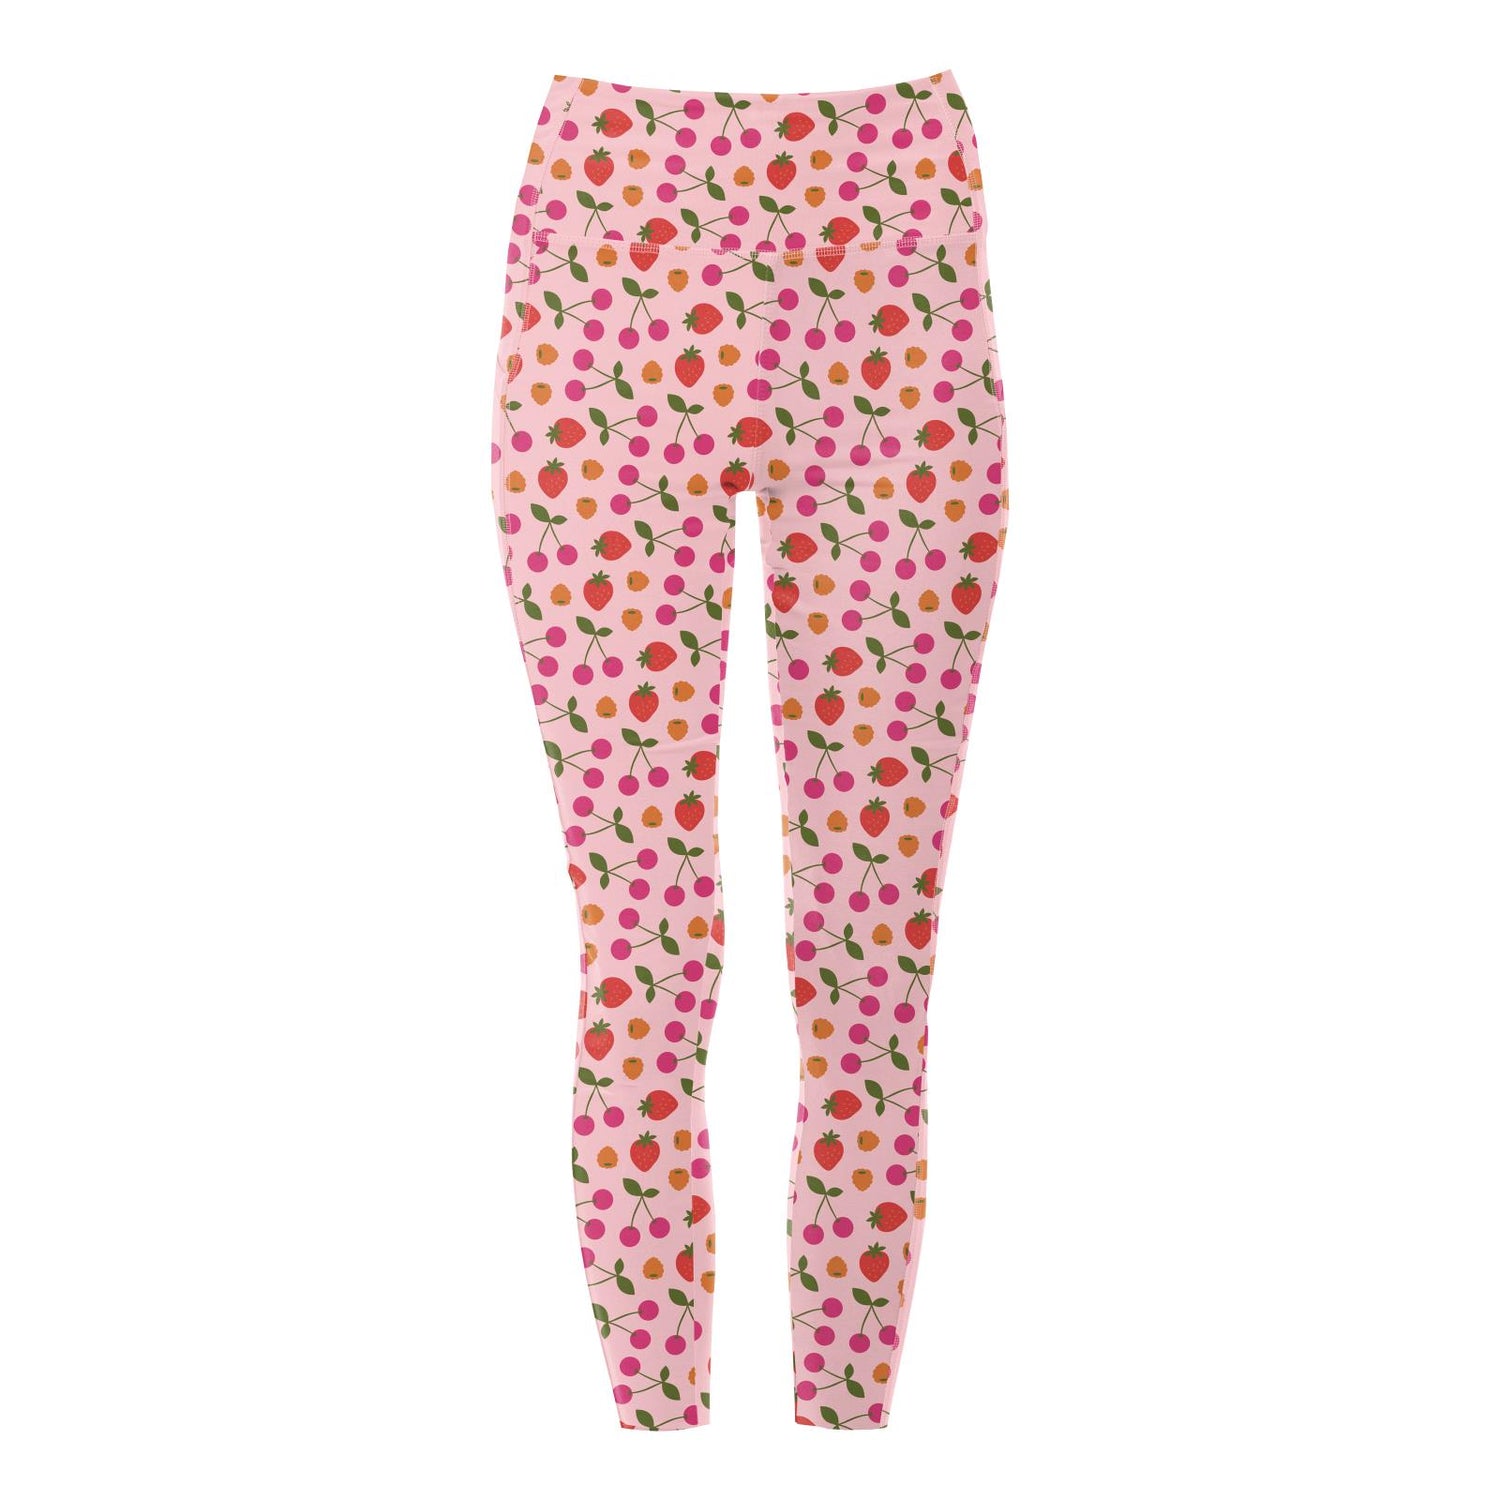 Women's Print Luxe Stretch 7/8 Leggings with Pockets in Lotus Berries